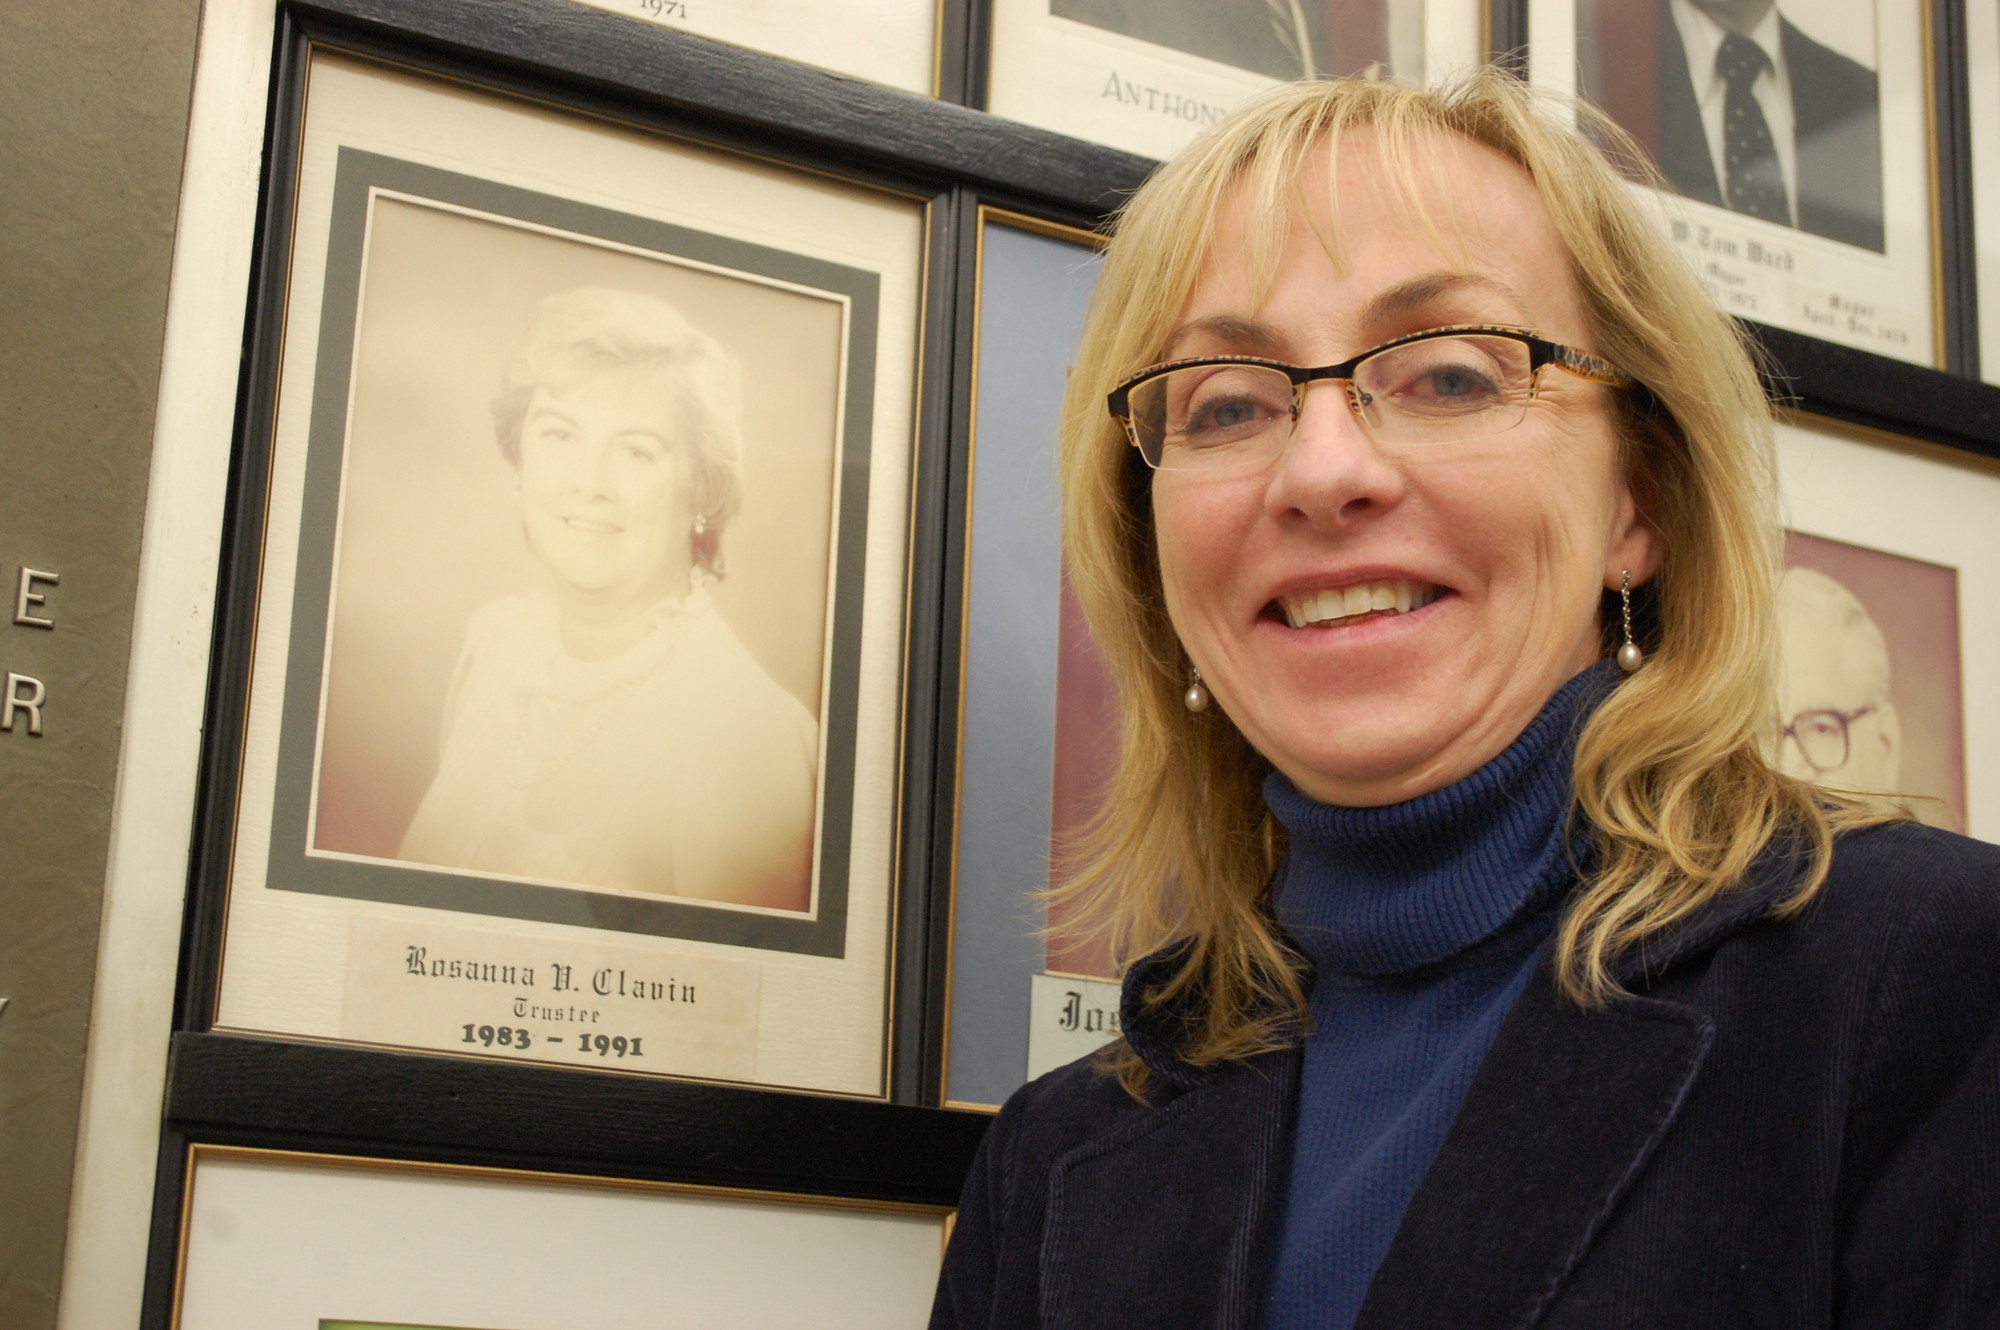 Valley Stream Trustee Virginia Clavin-Higgins is the daughter of Rosanna Clavin, the village’s first female board member, whose picture hangs in Village Hall.